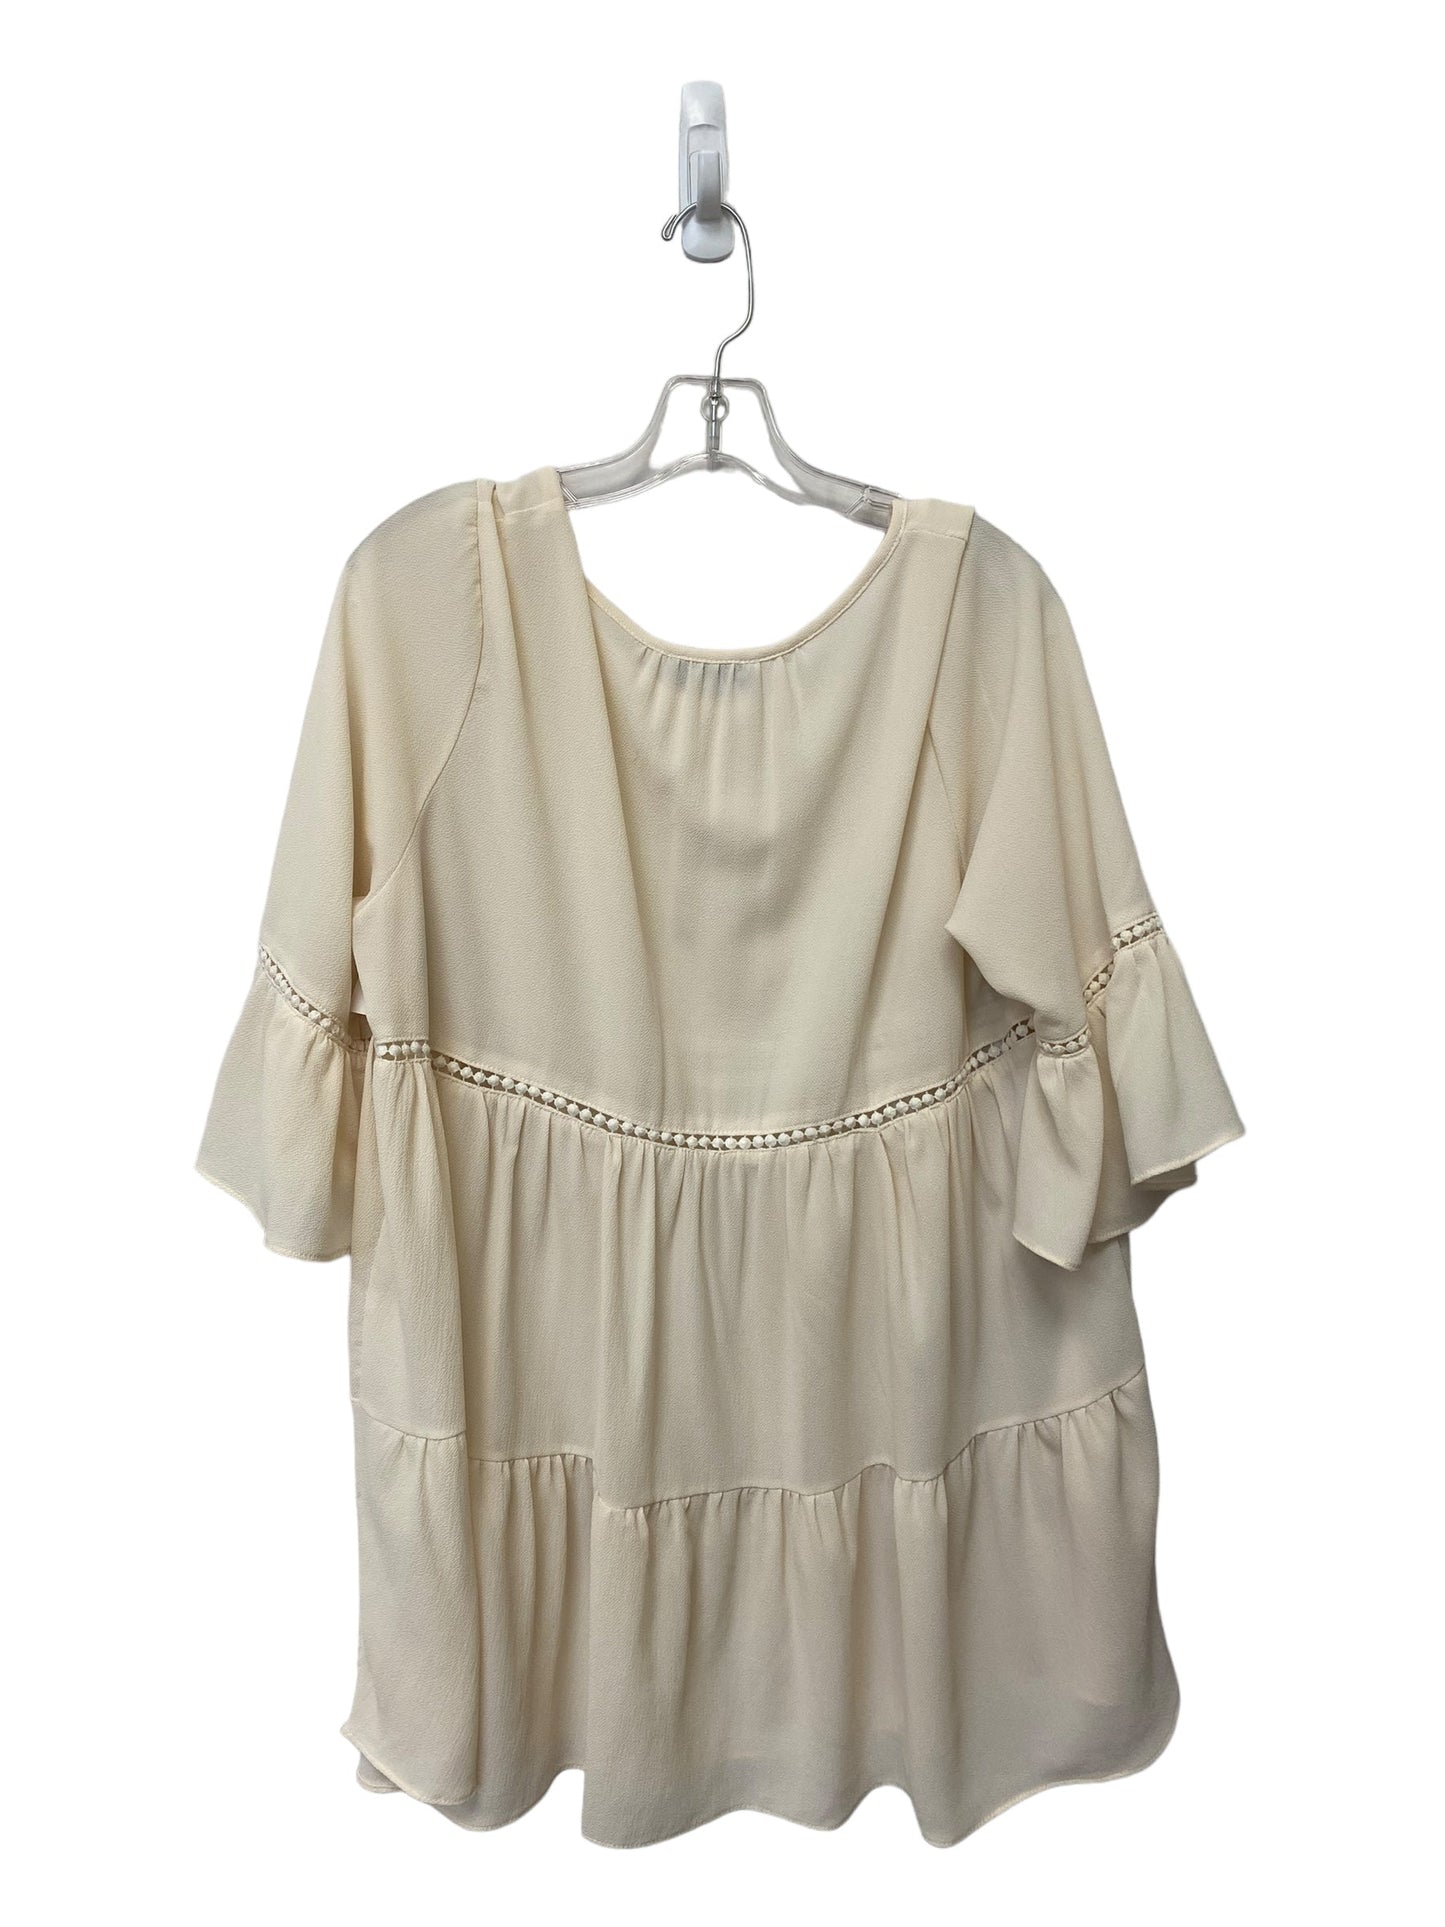 Cream Top Short Sleeve Spin, Size 1x